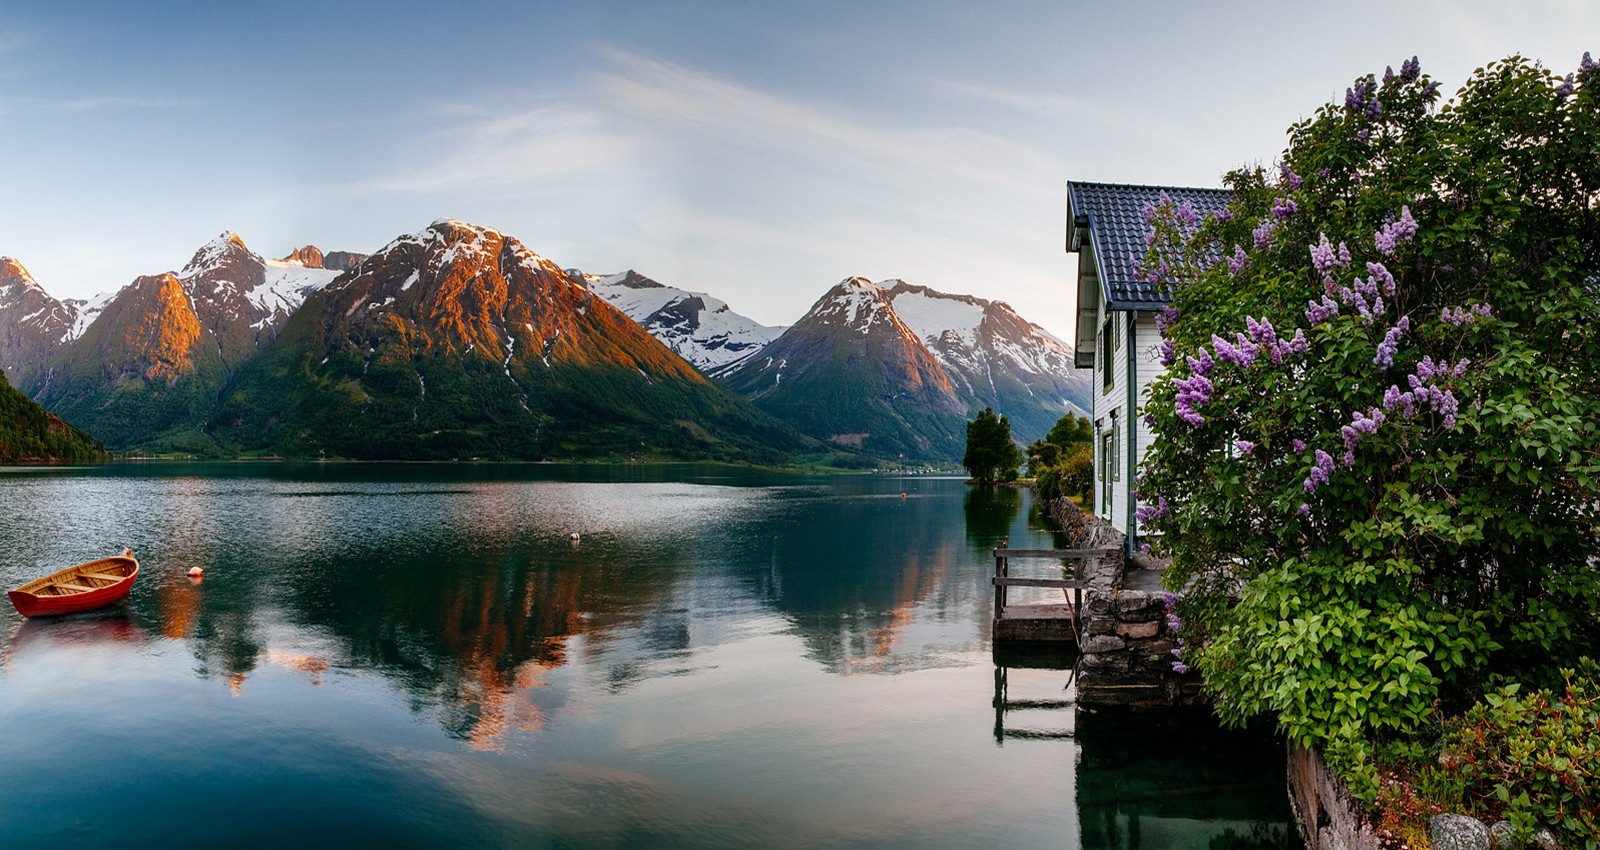 Spring Fjord Norway Mountains House Flowers Snowy Peak Boat Sea Reflection Nature Landscape 1600x850